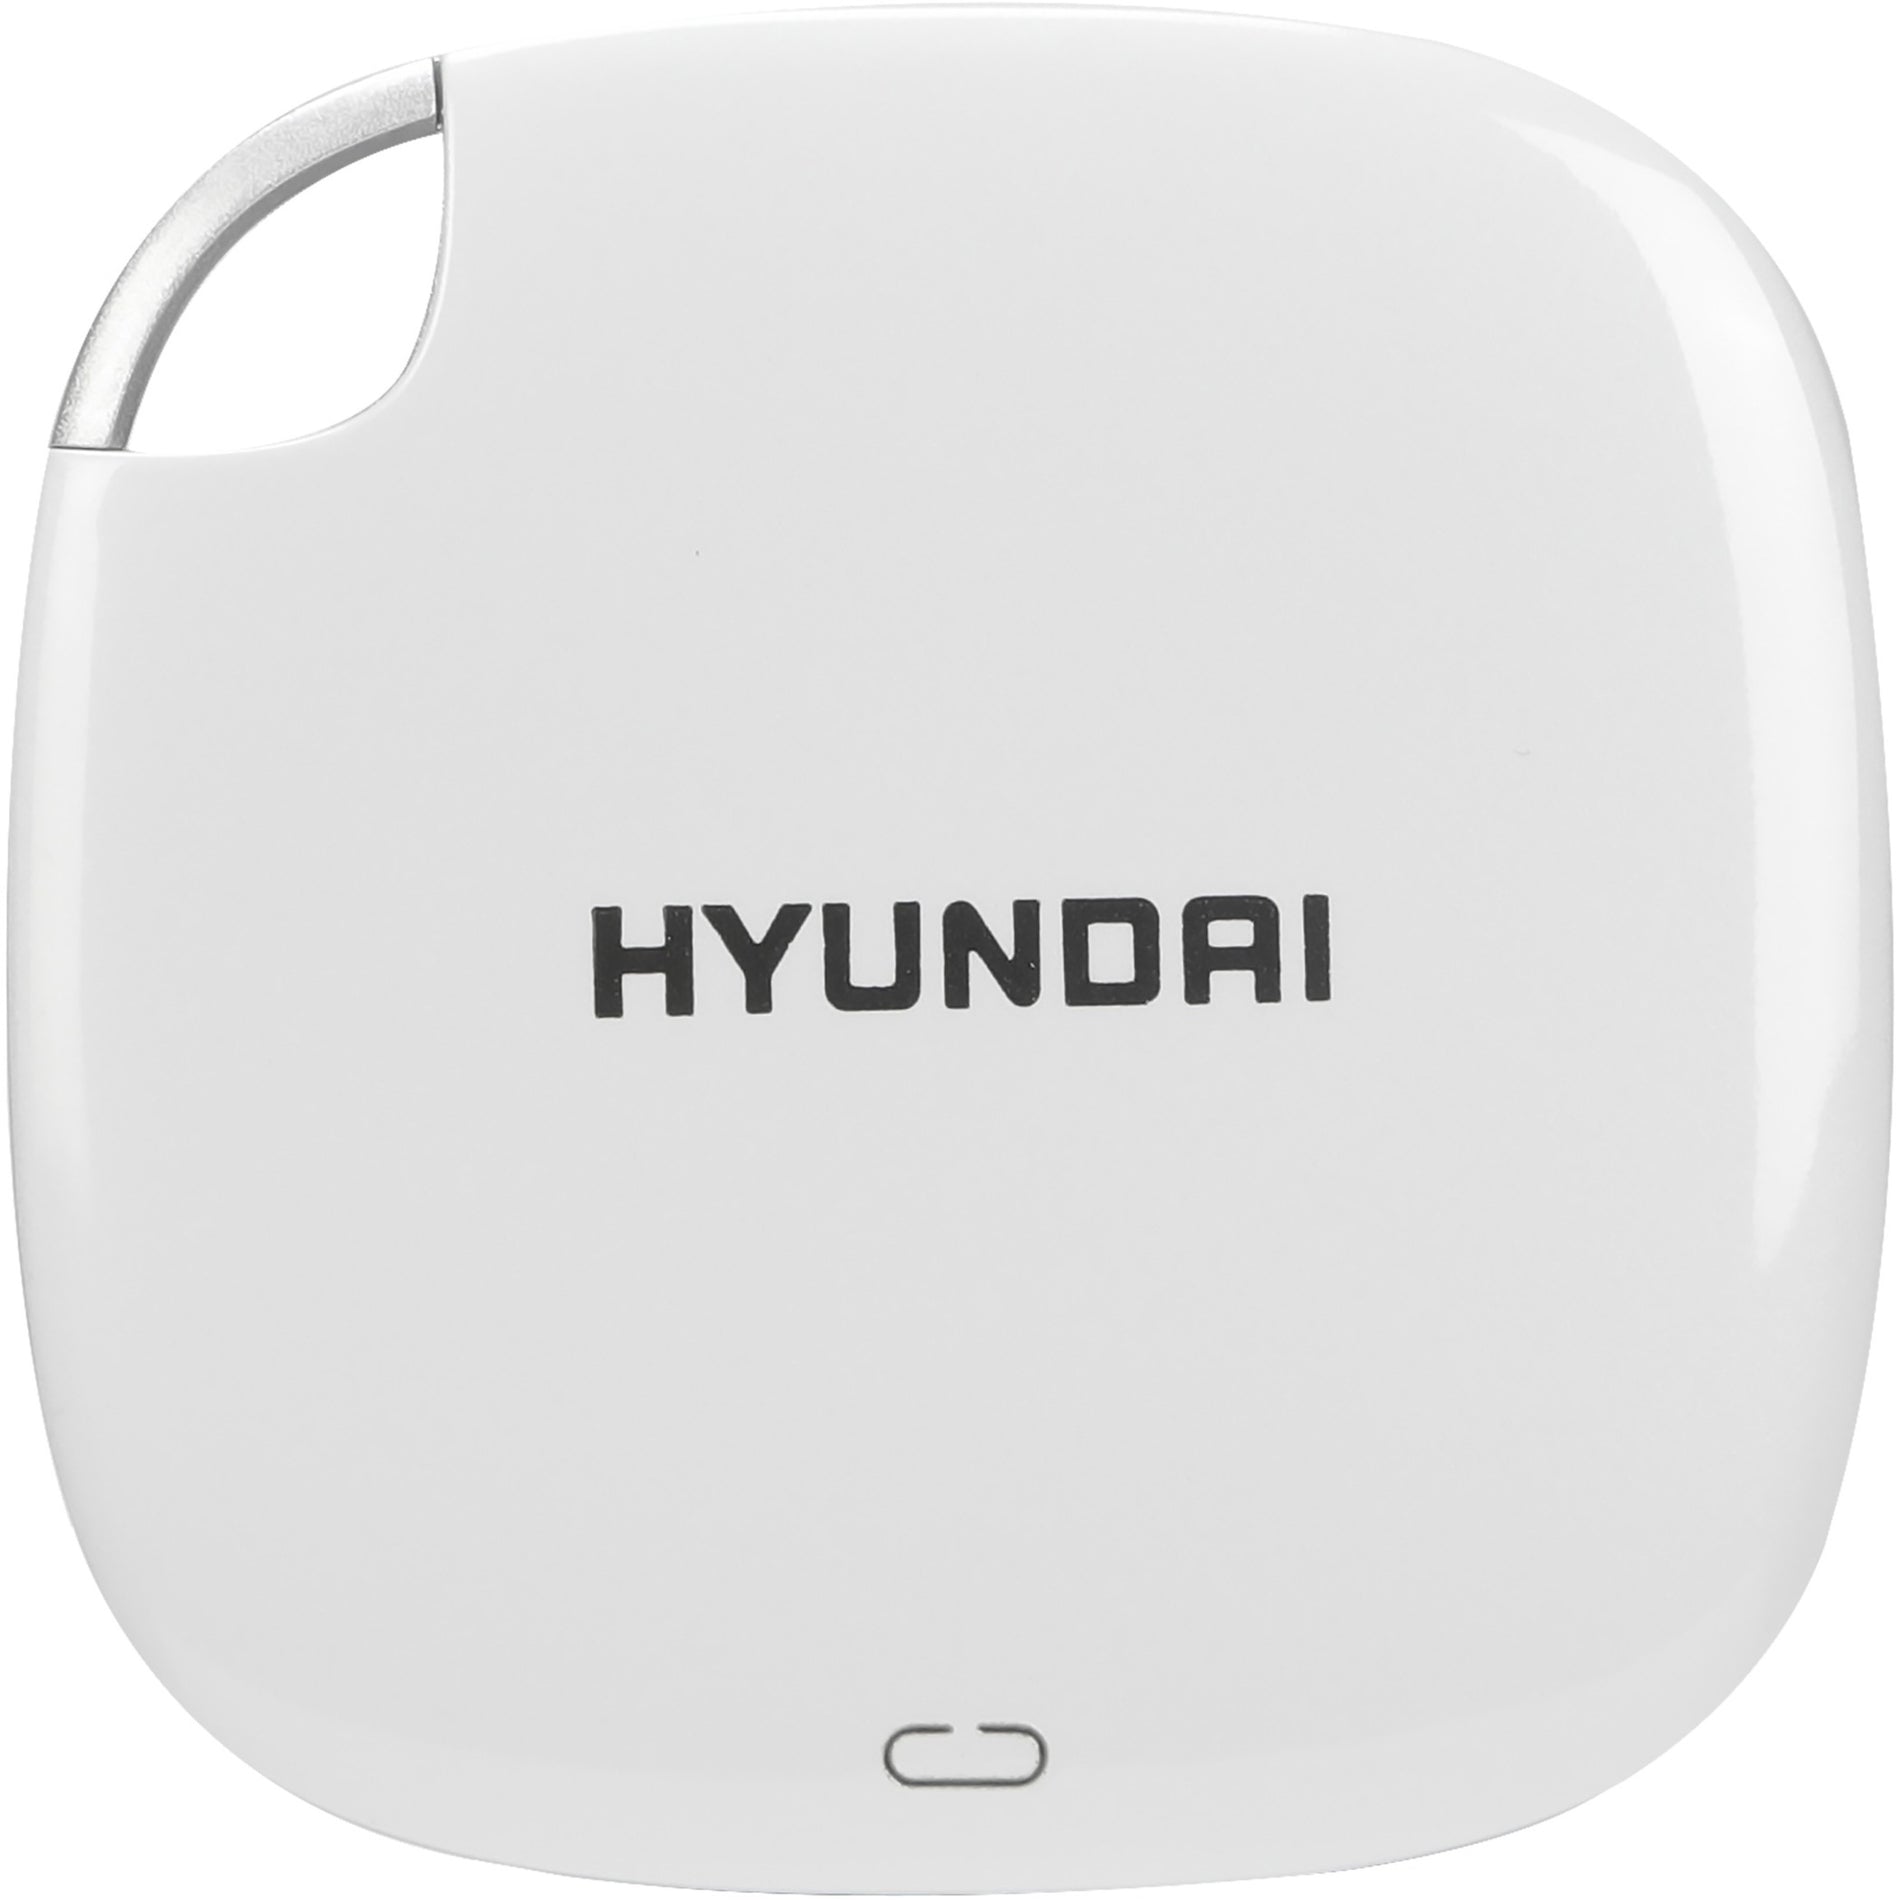 Hyundai HTESD1024PW Solid State Drive, 1TB External SSD USB 3.1 Type-C, 5 Year Warranty, Pearl White